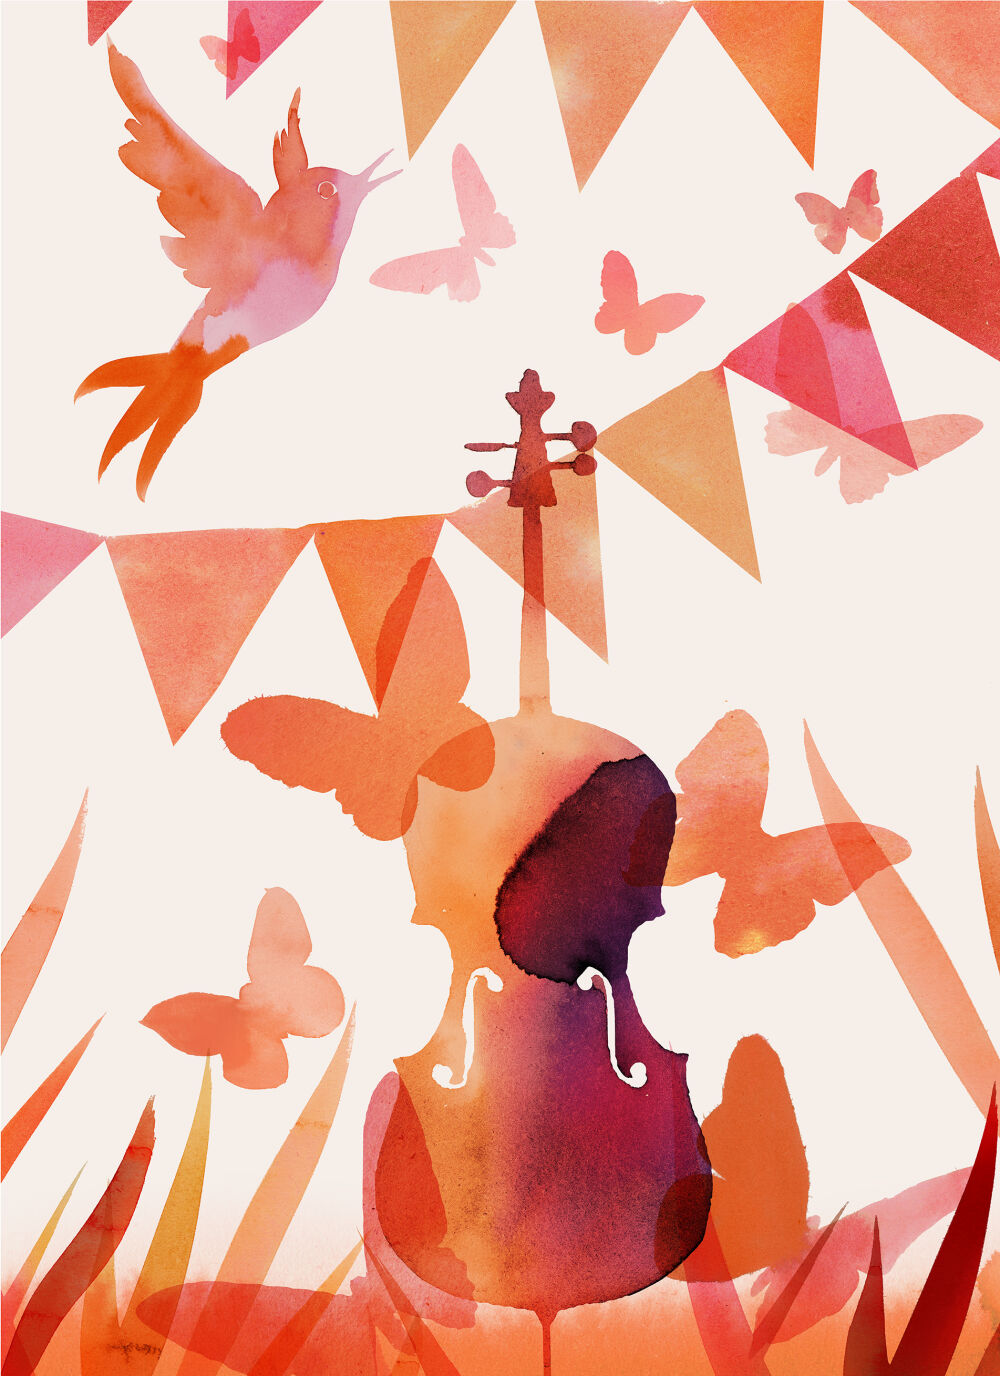 Illustrated summer ad campaign for the Royal Opera house by Stina Persson